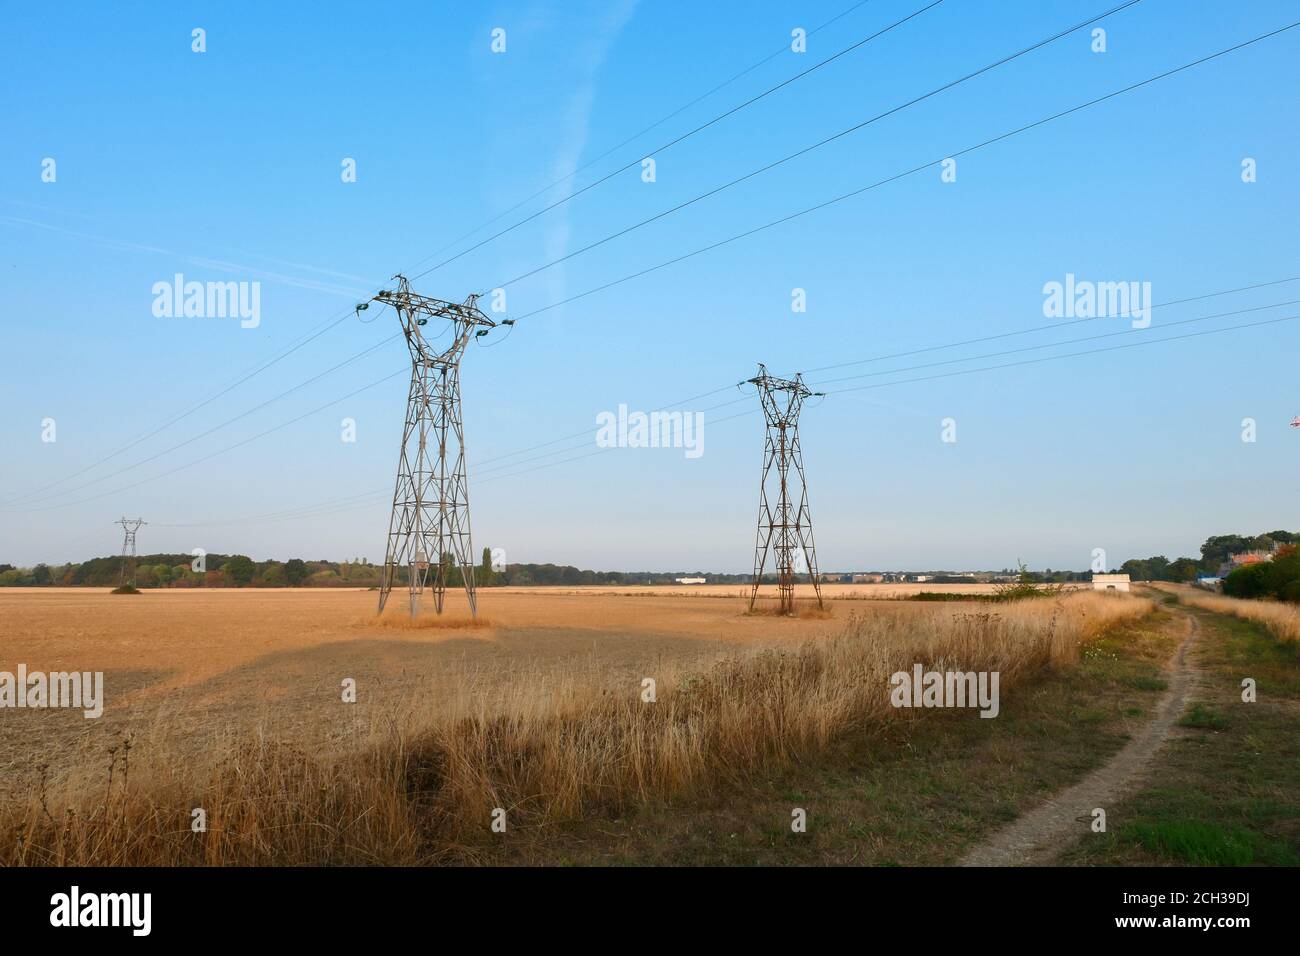 Group of electric pylons, high voltage lines. Overhead cables carrying electricity to cities. Stock Photo